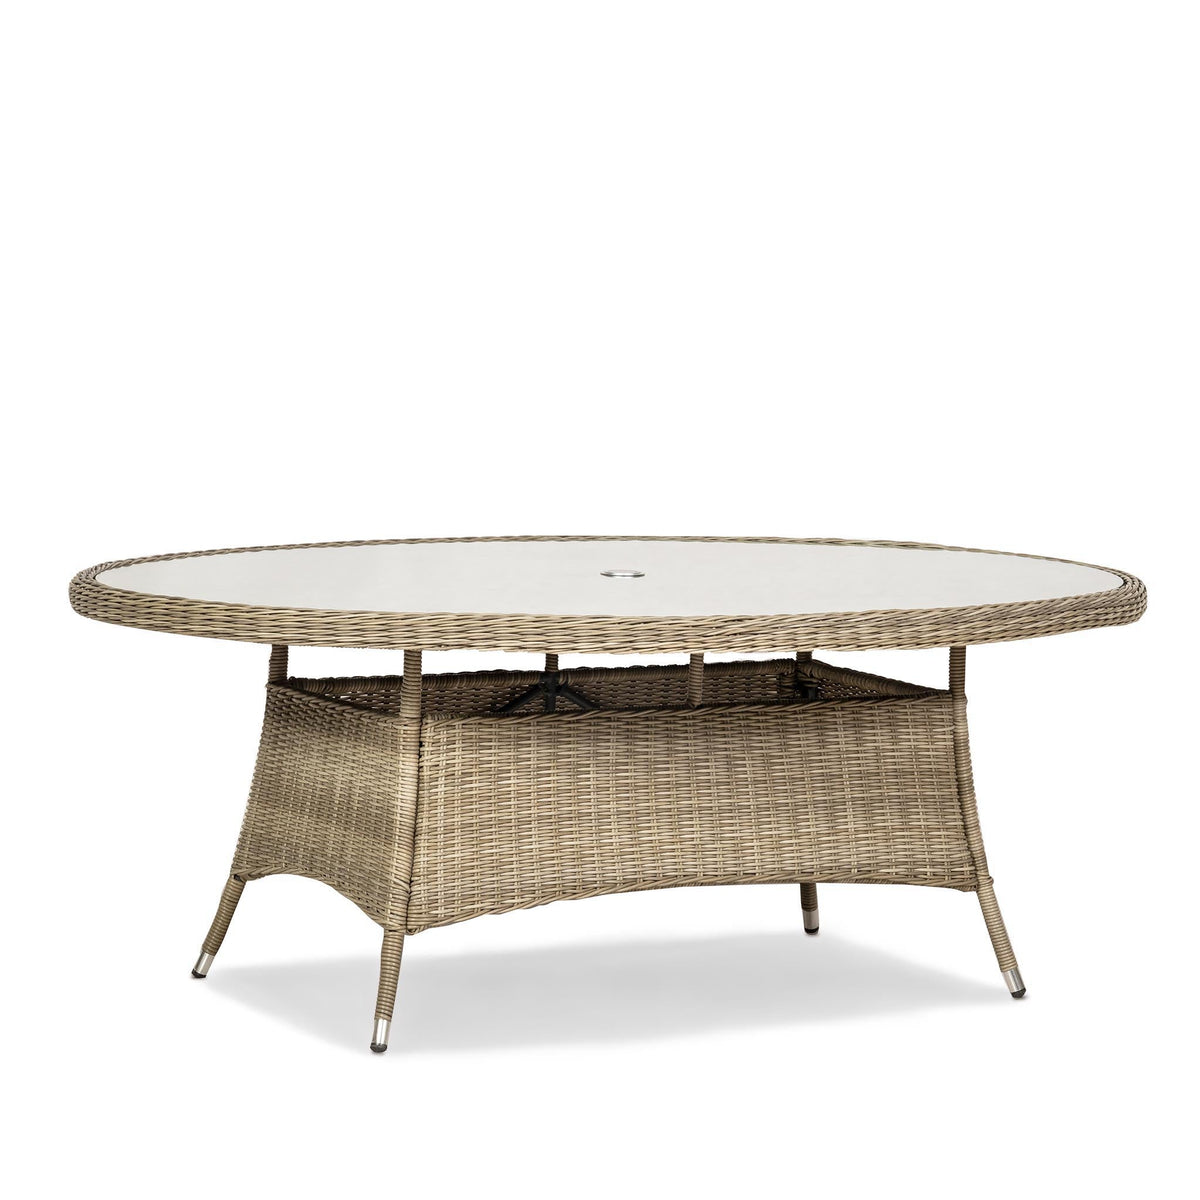 Wentworth 6 Seat Ellipse High-back Rattan Dining Set - Side view of Table